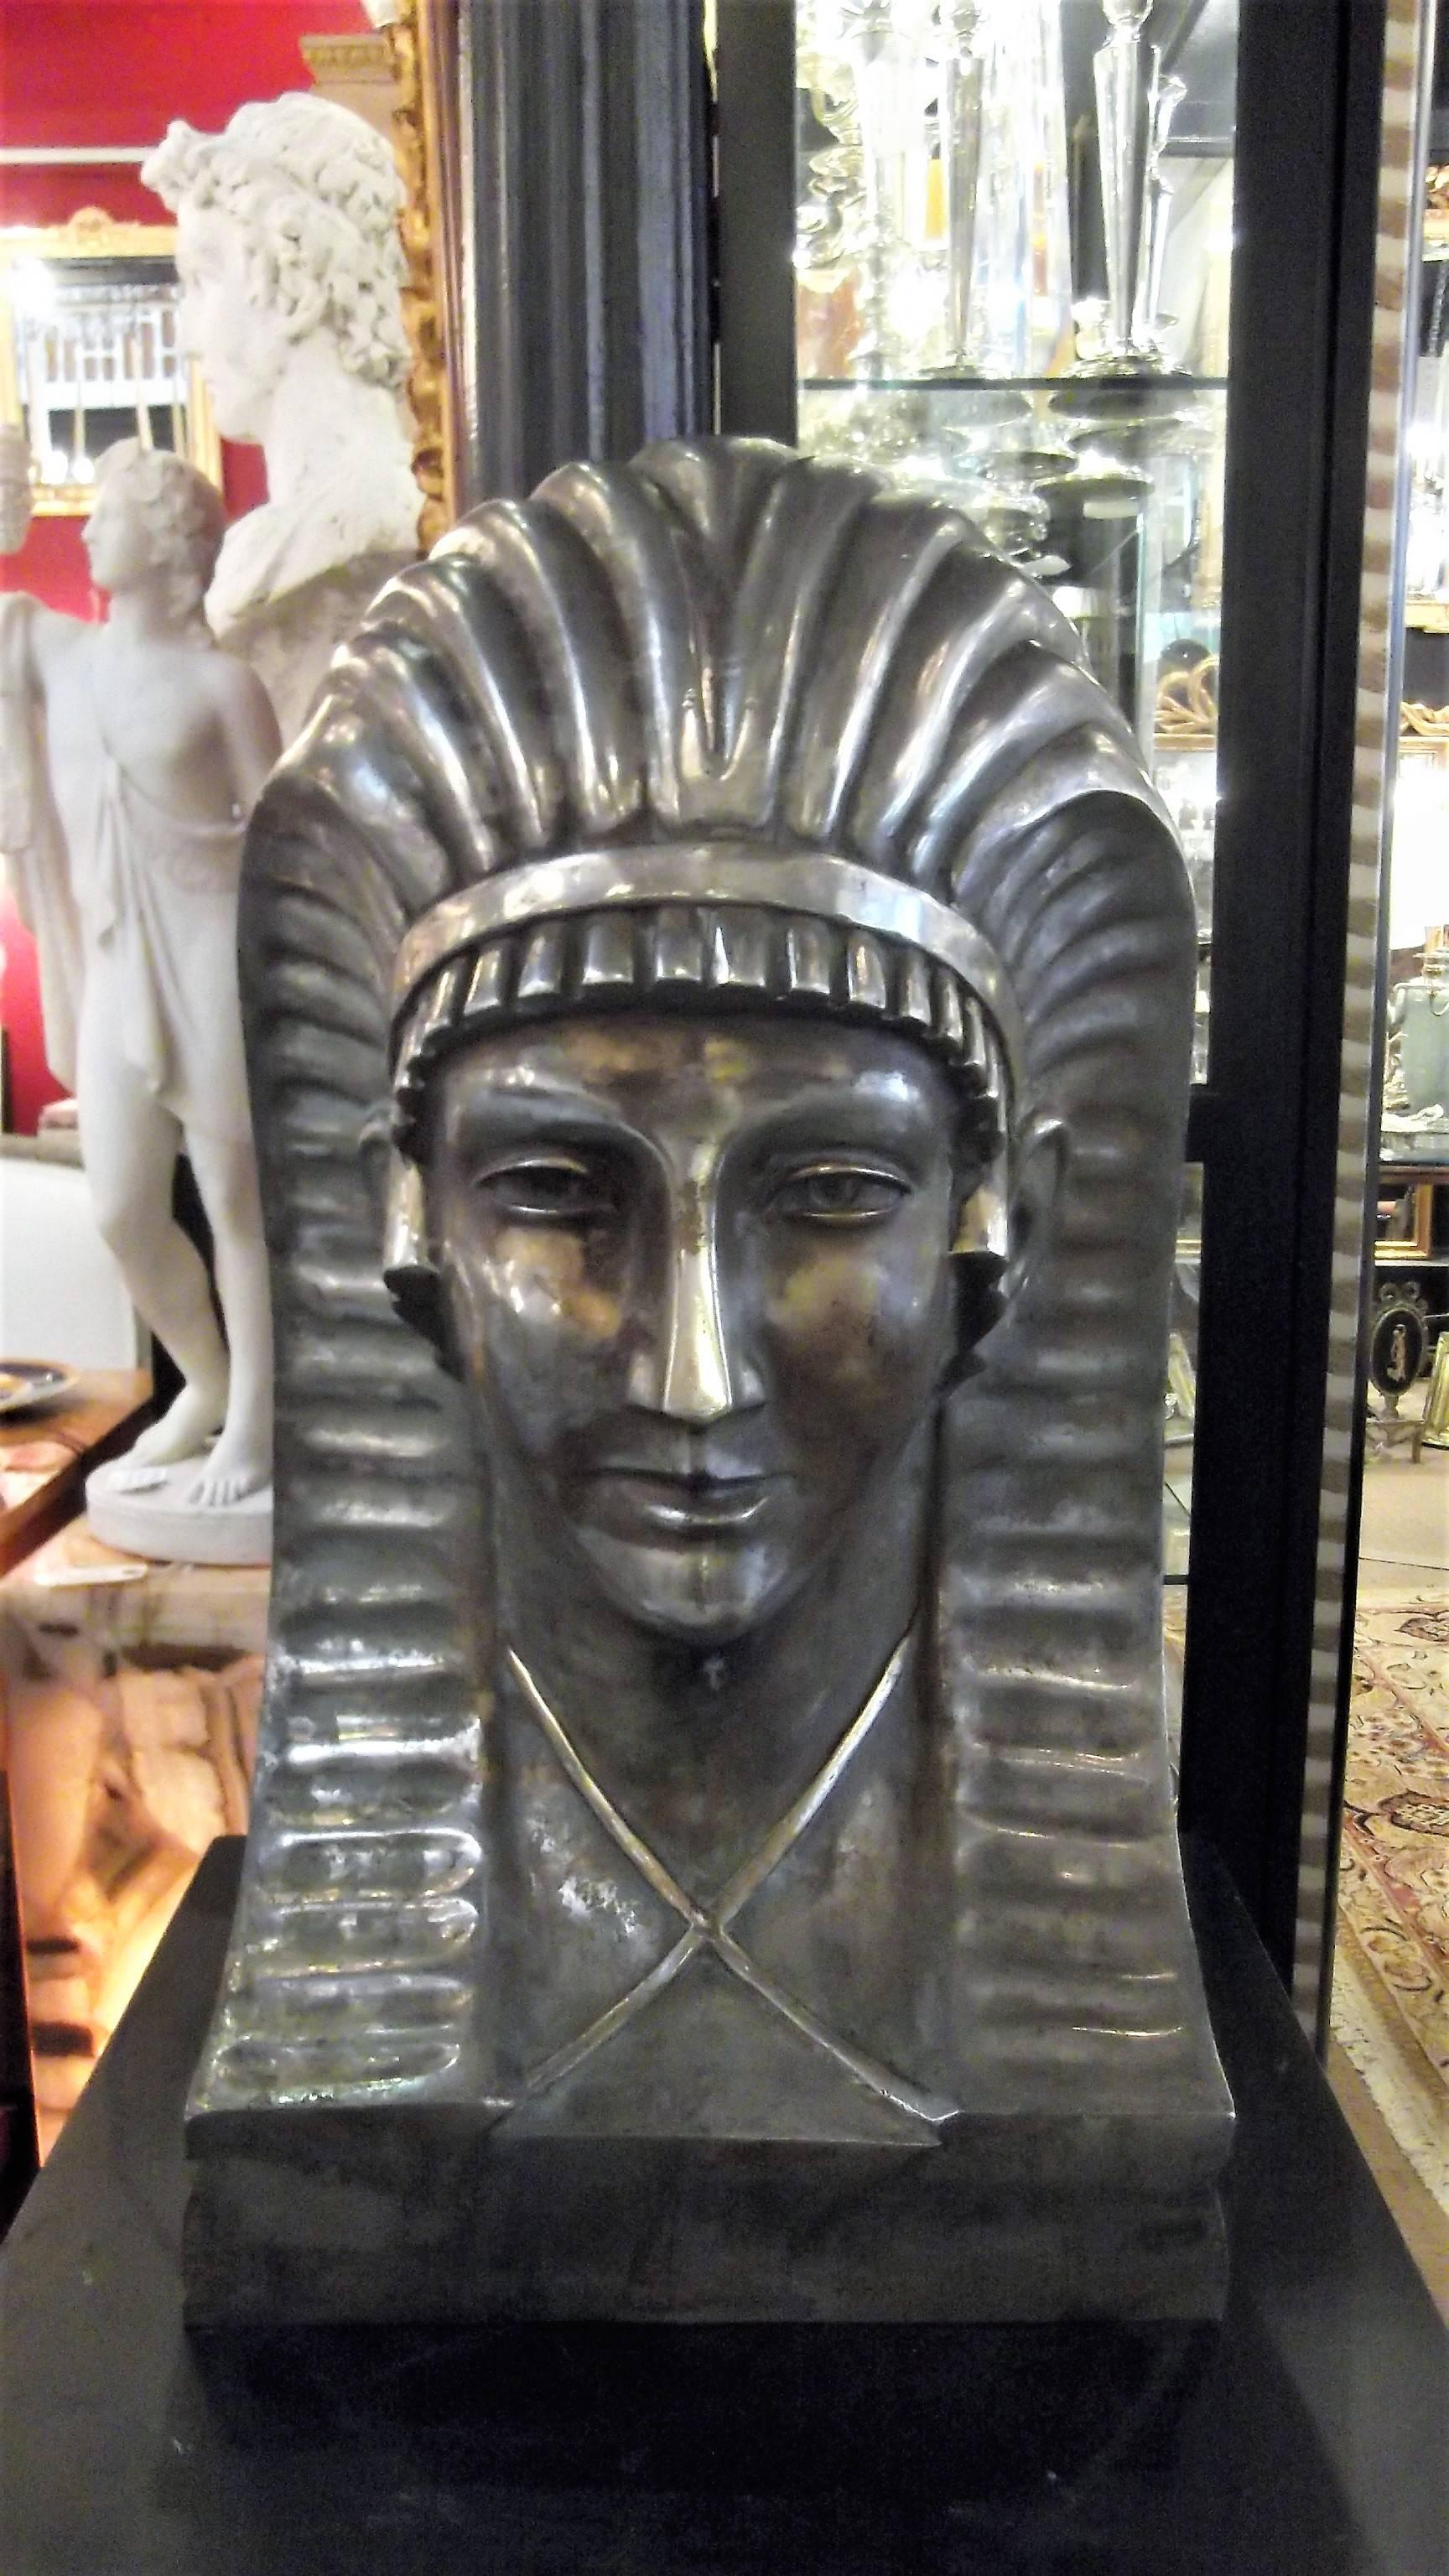 Impressive cast bronze bust in the Egyptian Revival style. The silvered finish is original showing all the signs of expected age with a nice natural pagination.